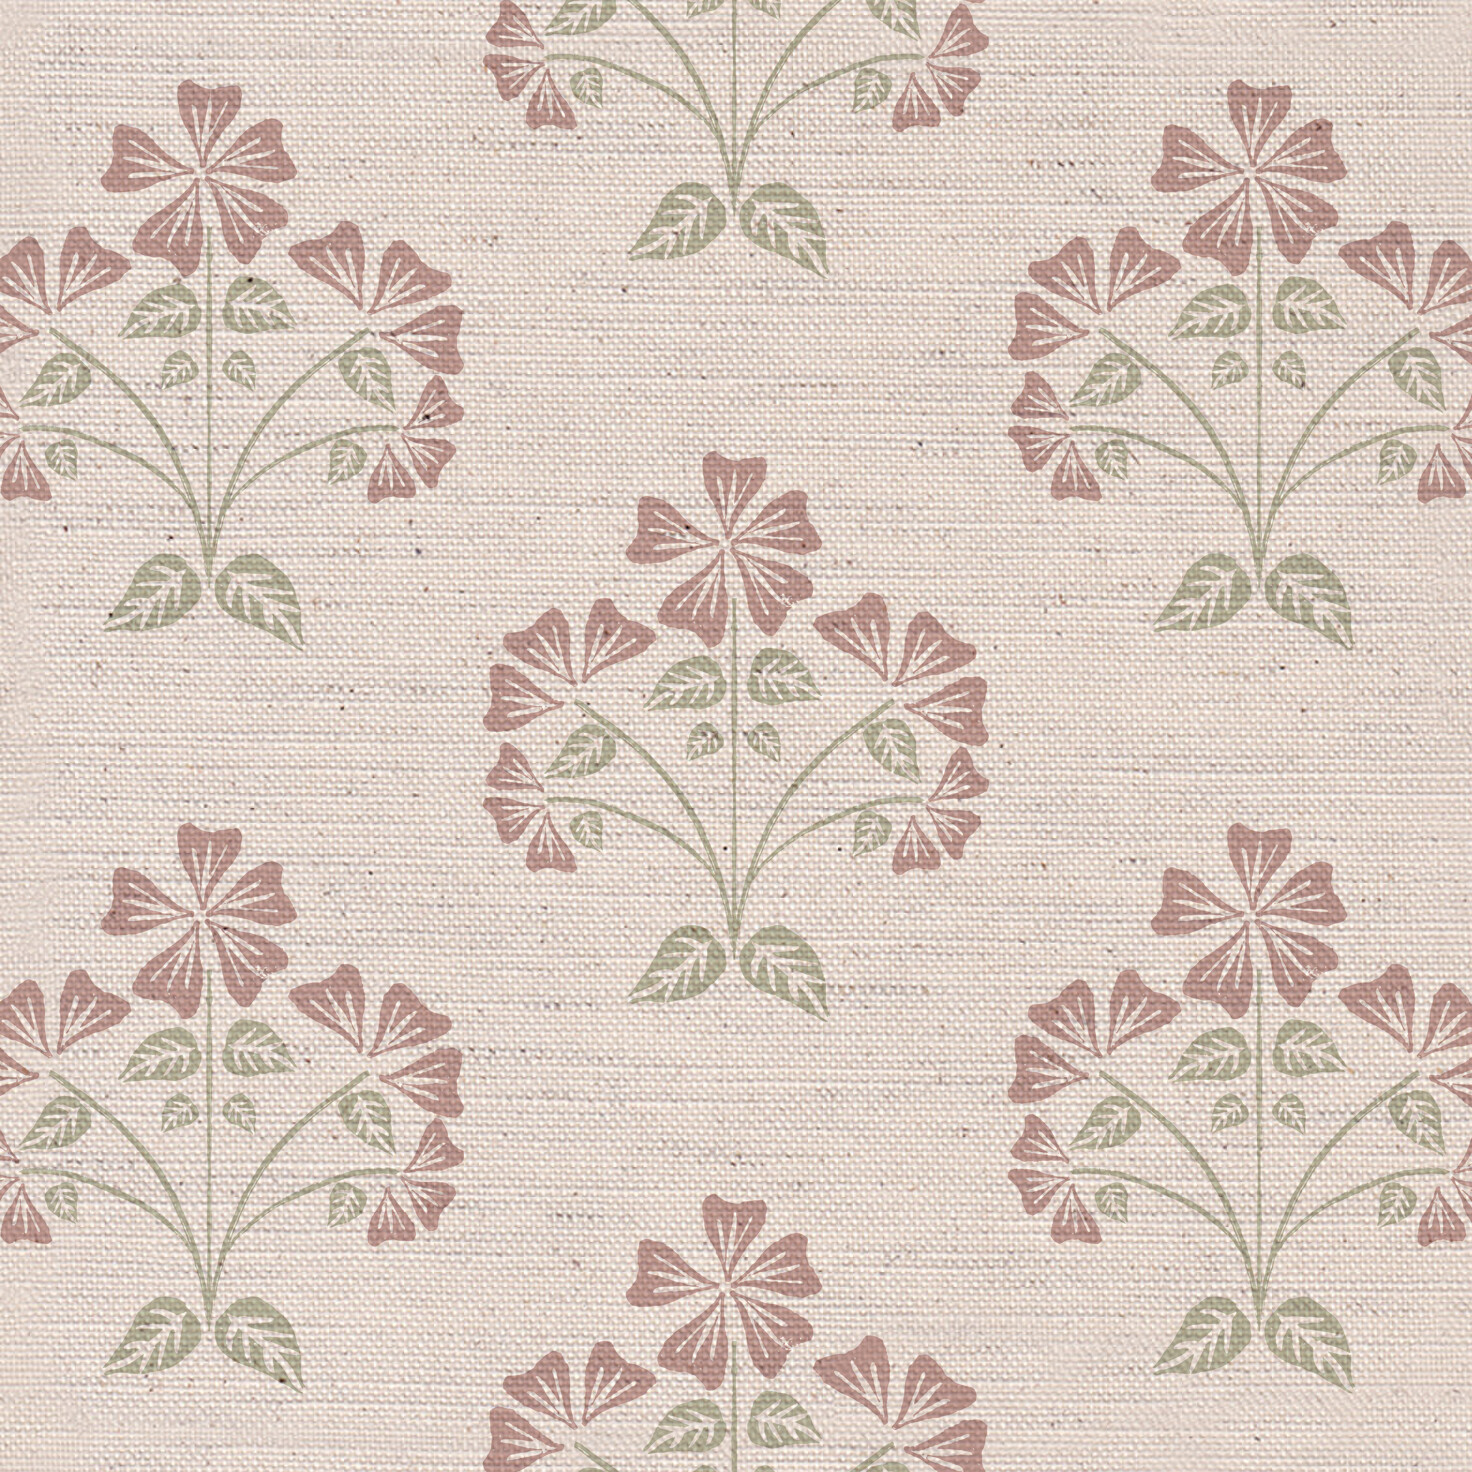 Meadow Posy Fabric in Pink on Natural Background